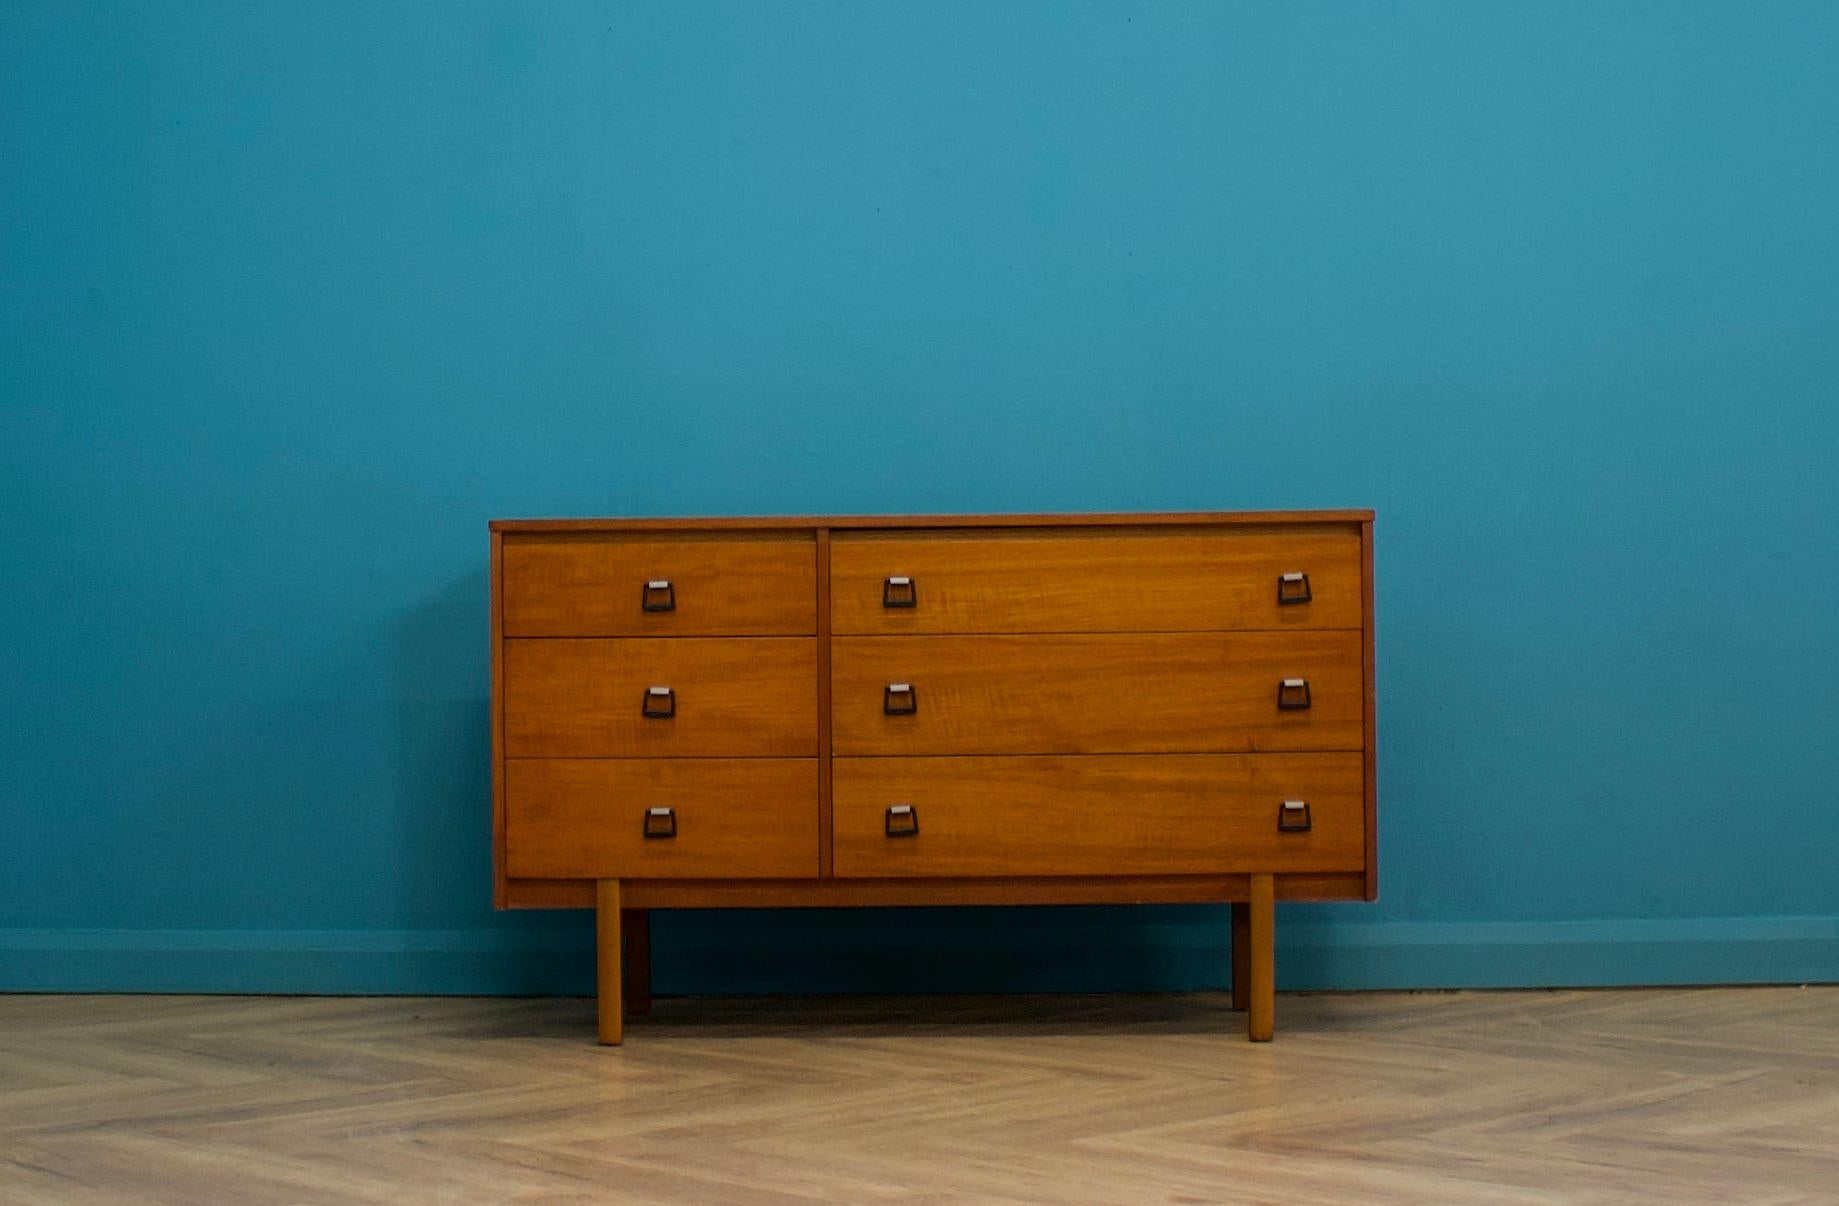 A teak chest of drawers from Symbol, Circa 1960s

It is long and low - so it can be used as a compact sideboard or TV unit

Featuring six drawers for plenty of storage

The matching dressing chest is available on a separate listing - they can be